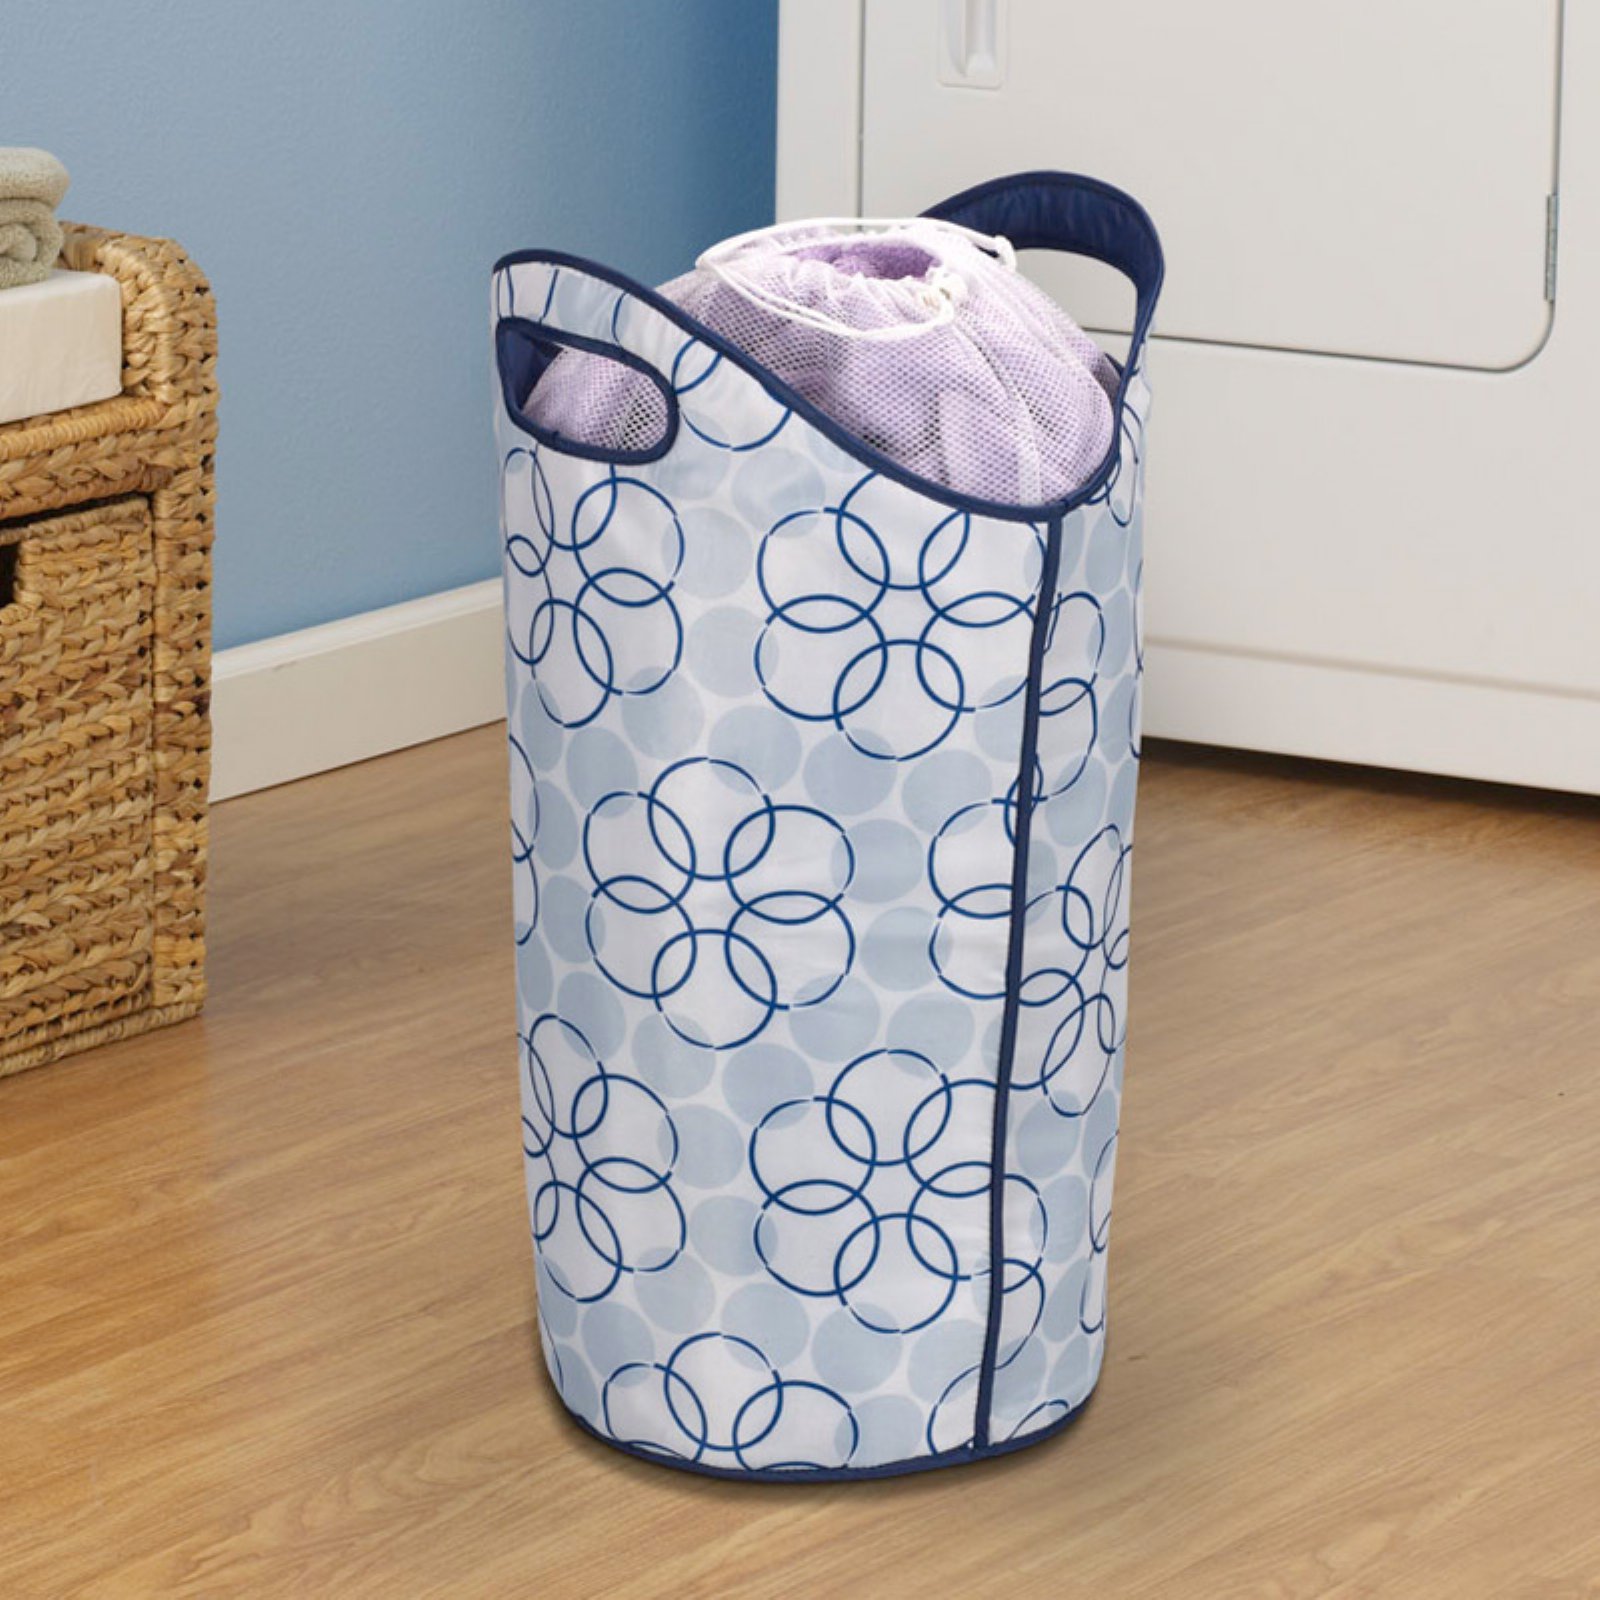 Household Essentials Patterned Laundry Hamper Tote - image 2 of 4